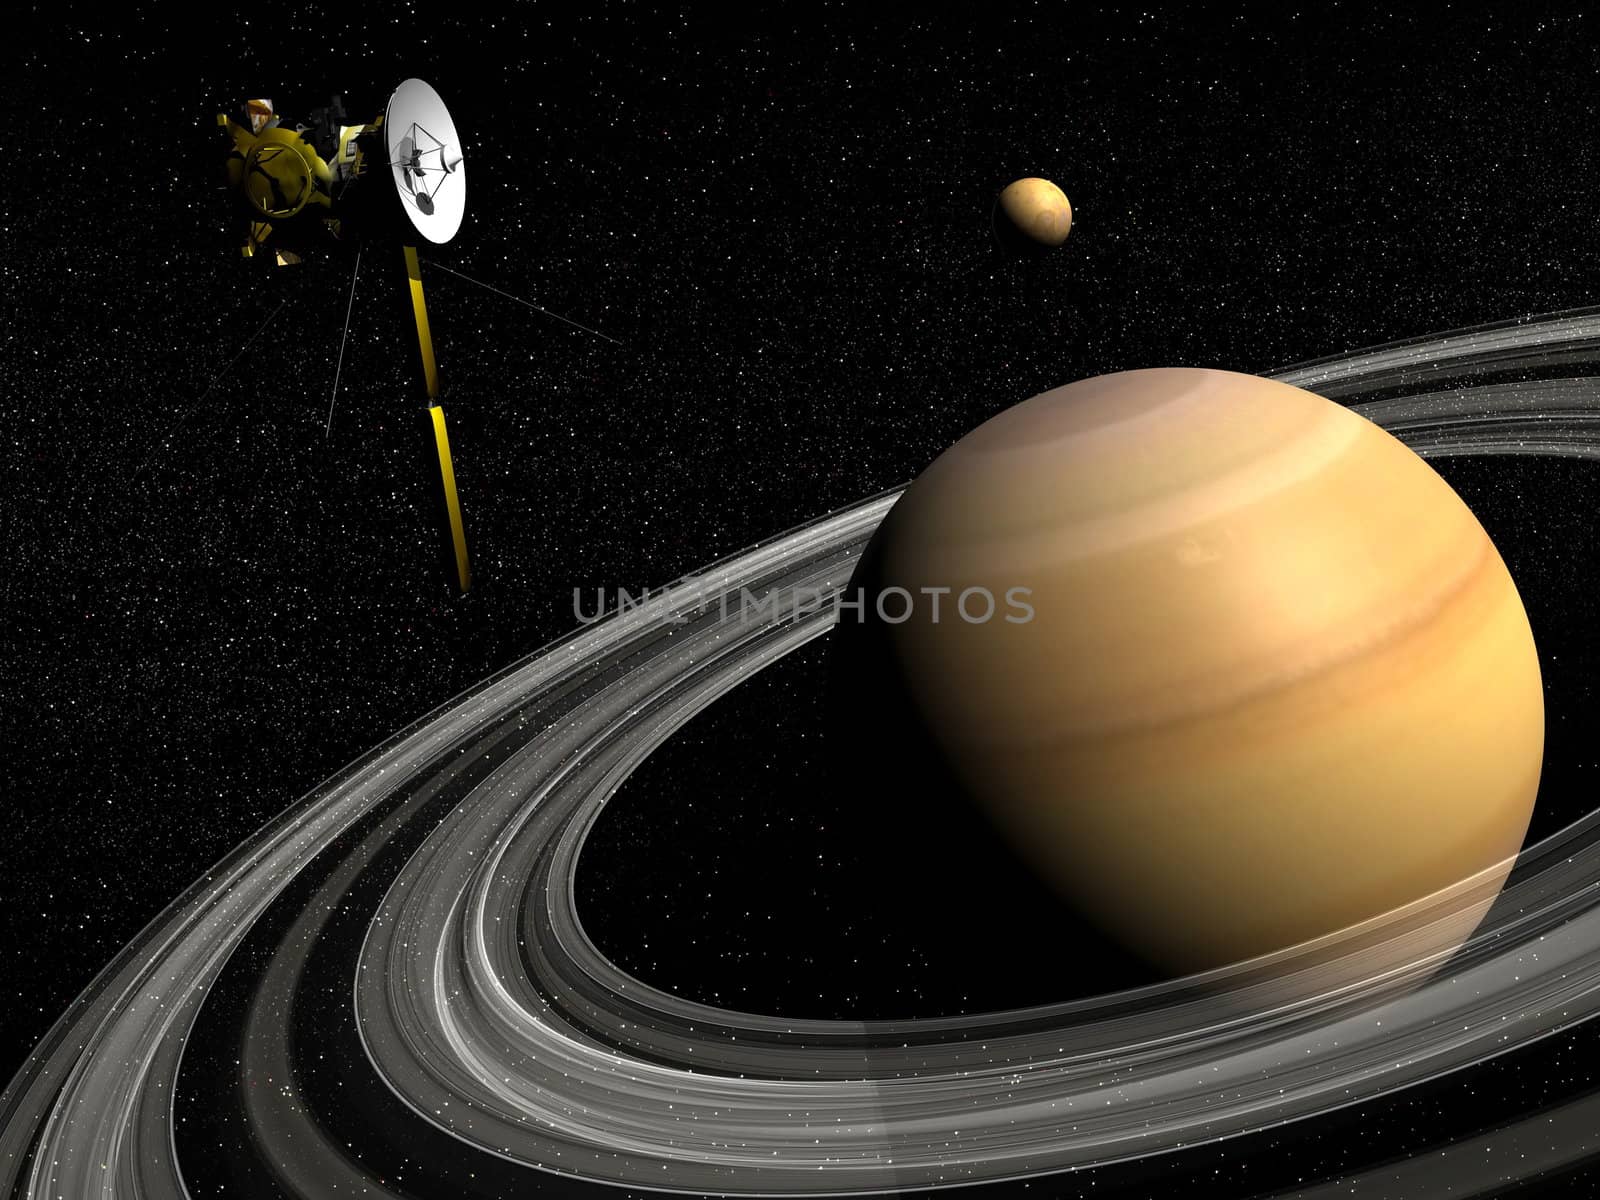 Cassini spacecraft near Saturn and titan satellite in the universe - Elements of this image furnished by NASA